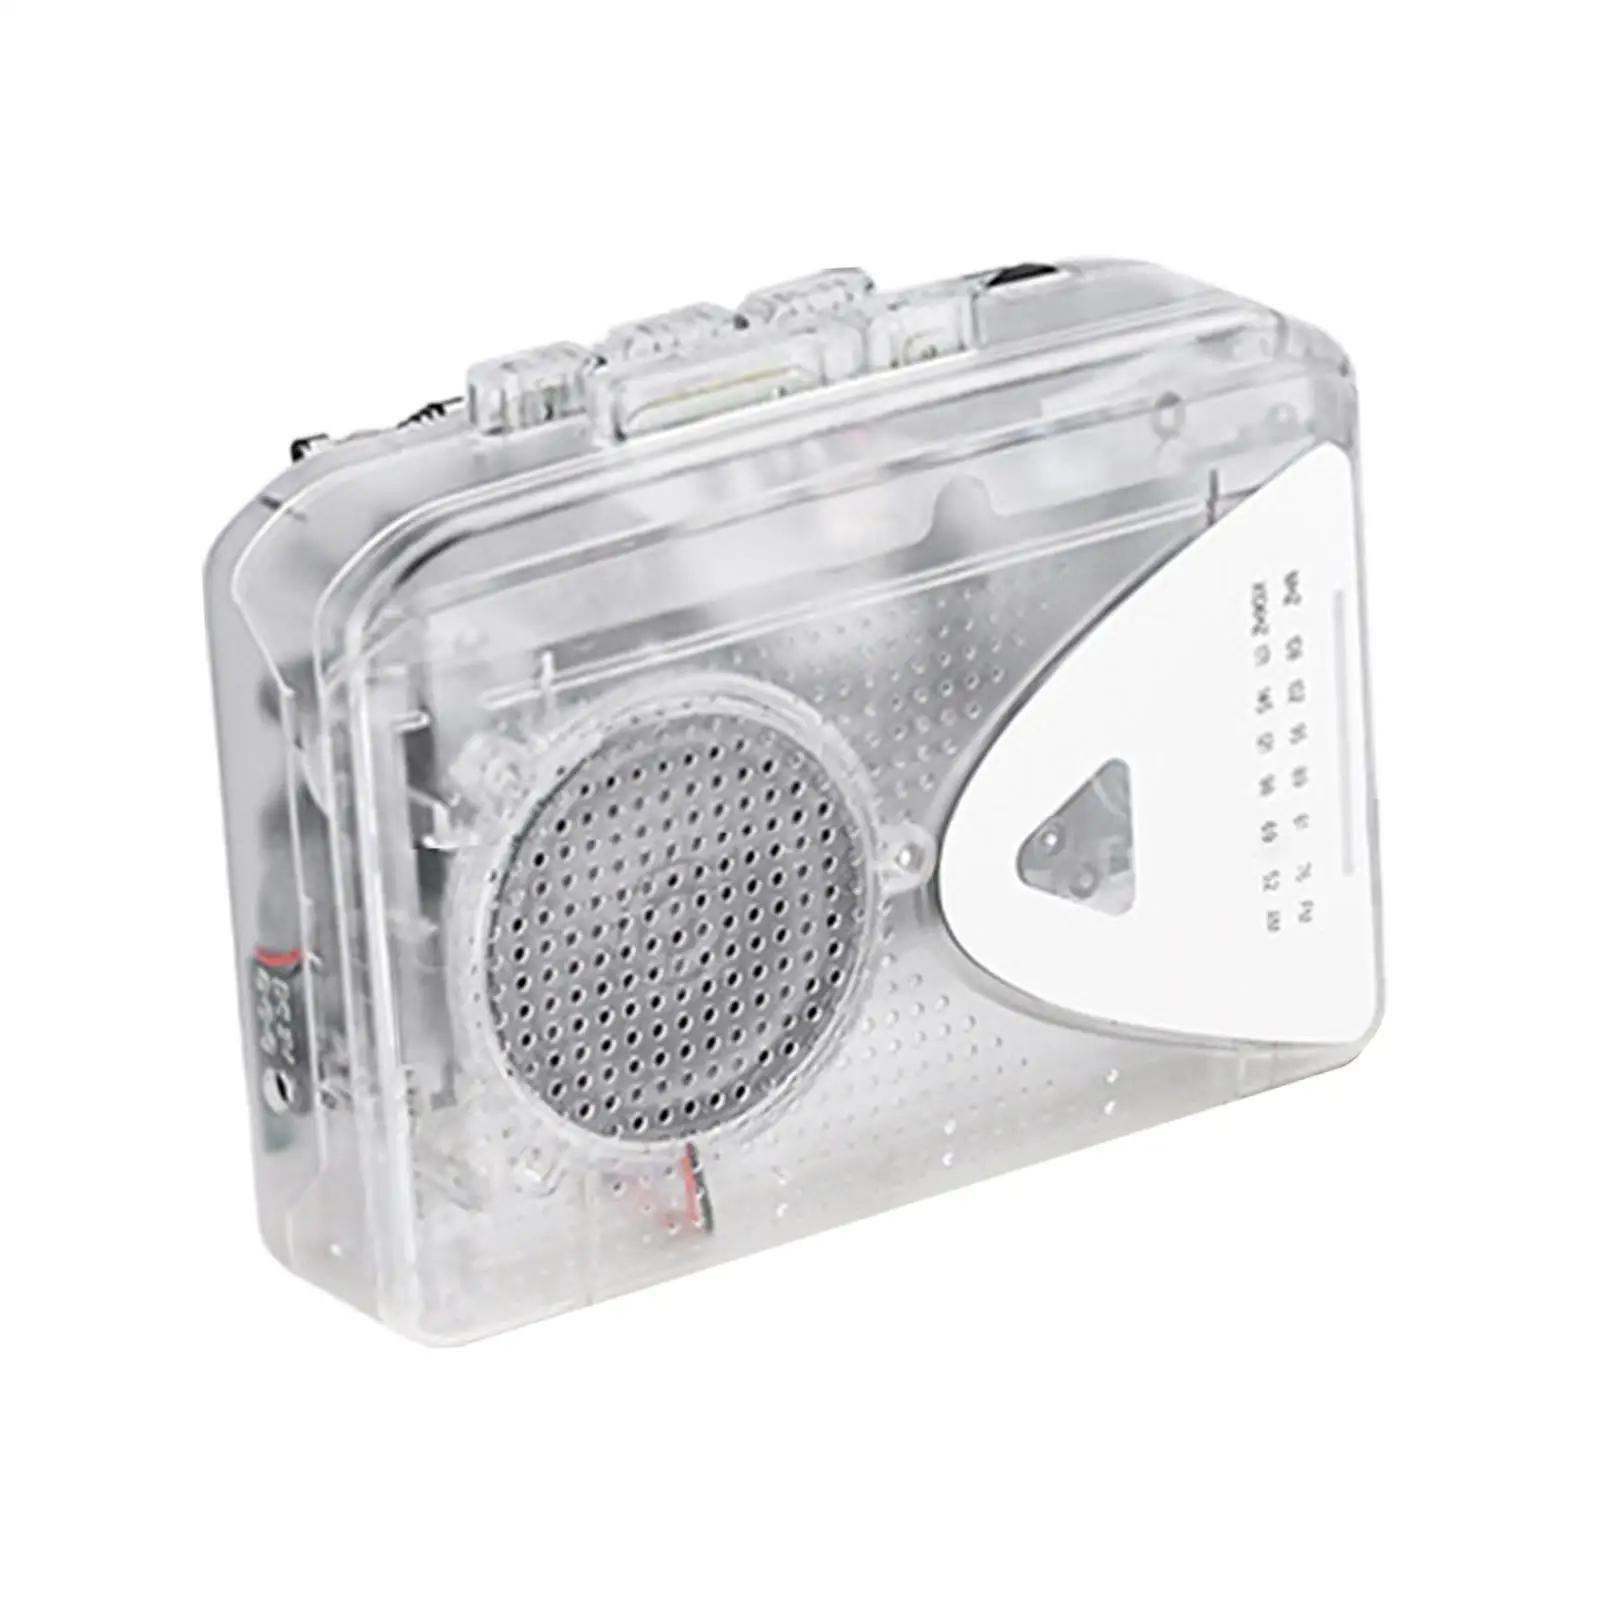 Cassette Player Portable Easy to Use with Headphones Transparent AM FM Radio